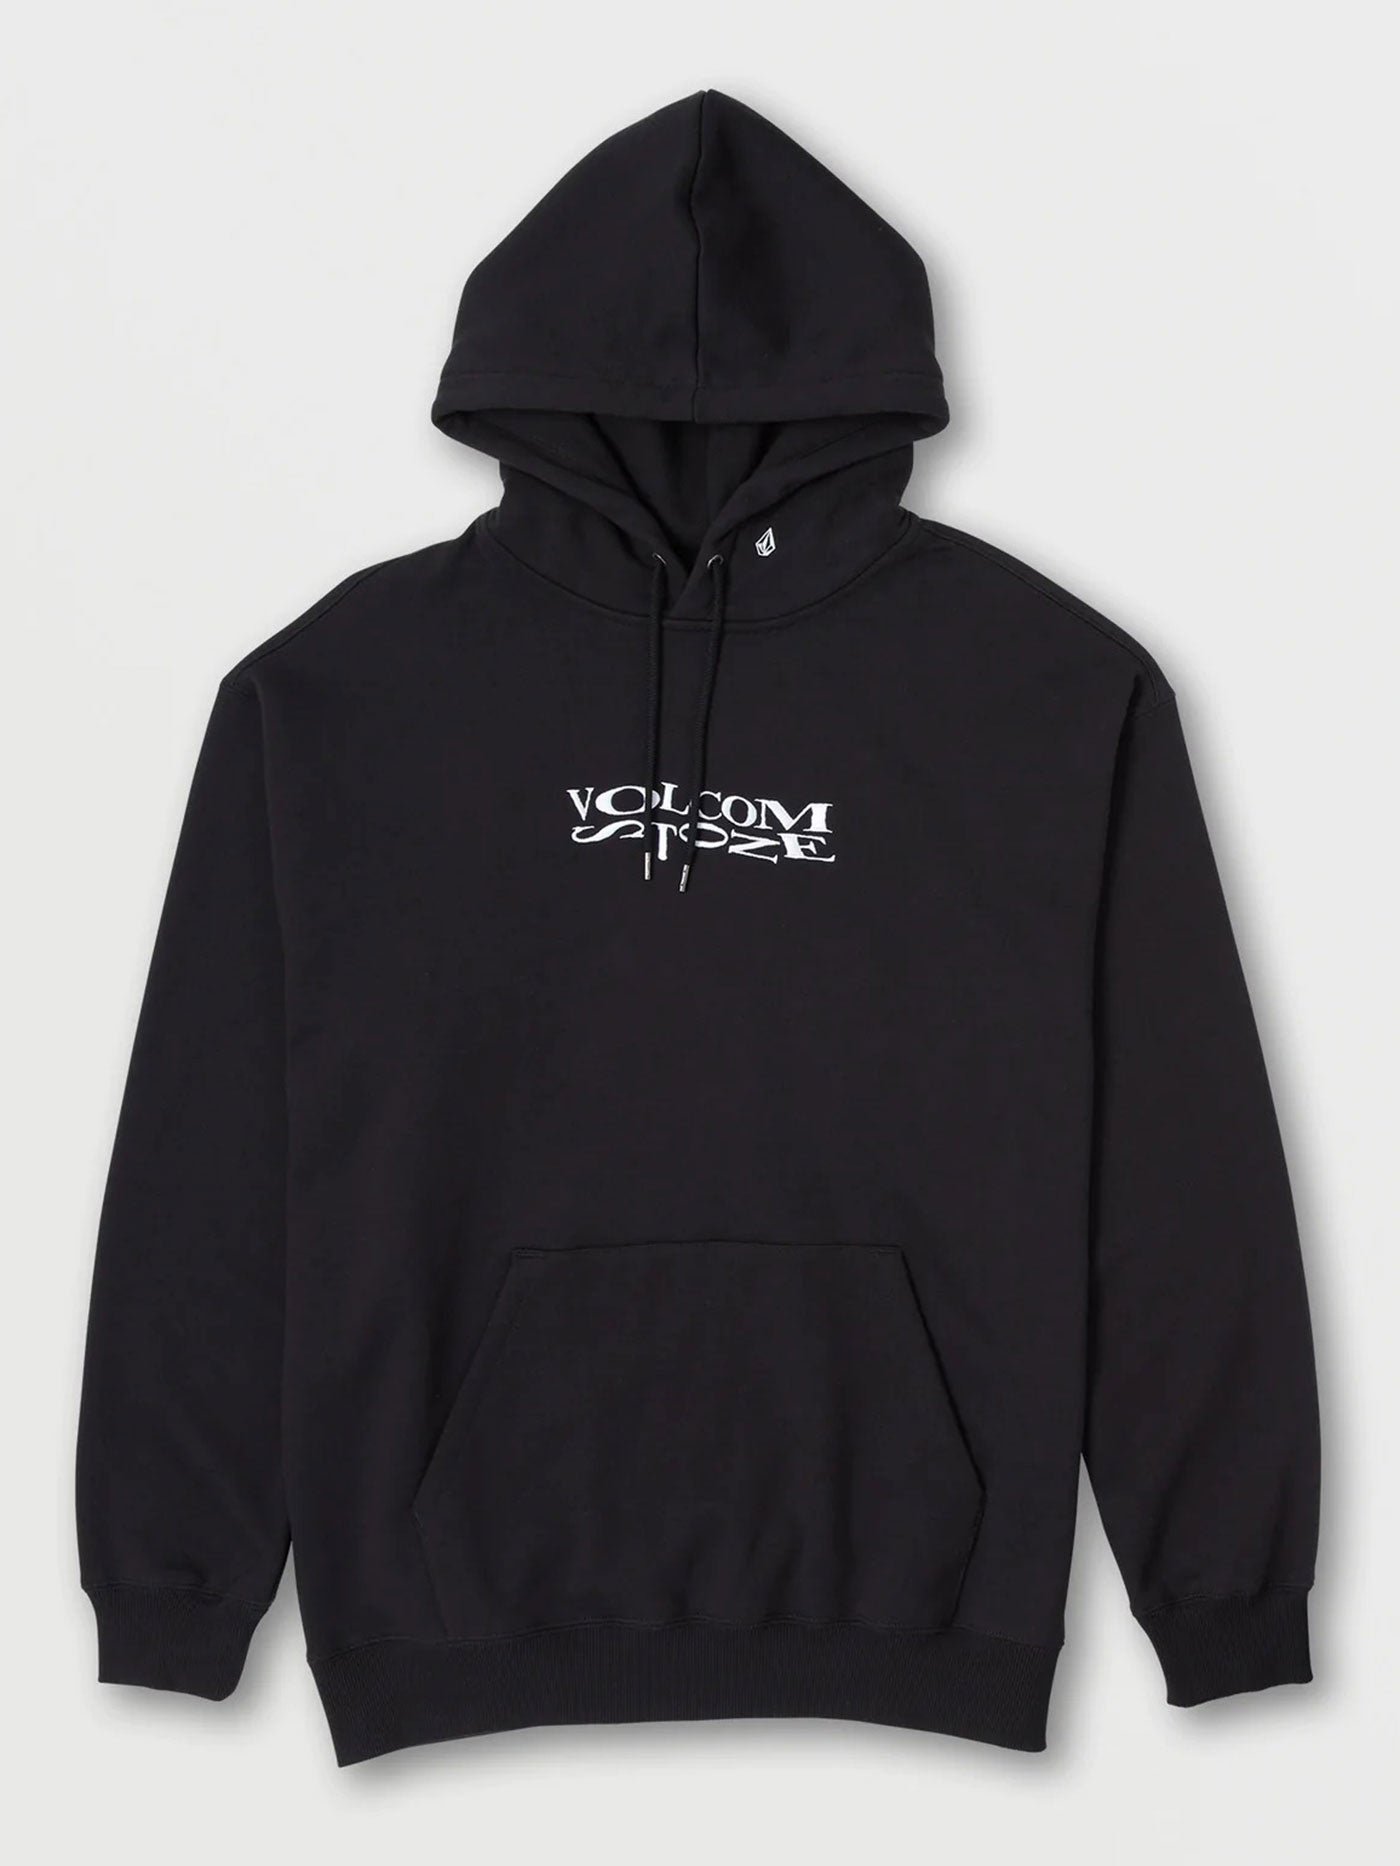 VOLCOM - Shop Clothing & Outerwear Online | EMPIRE